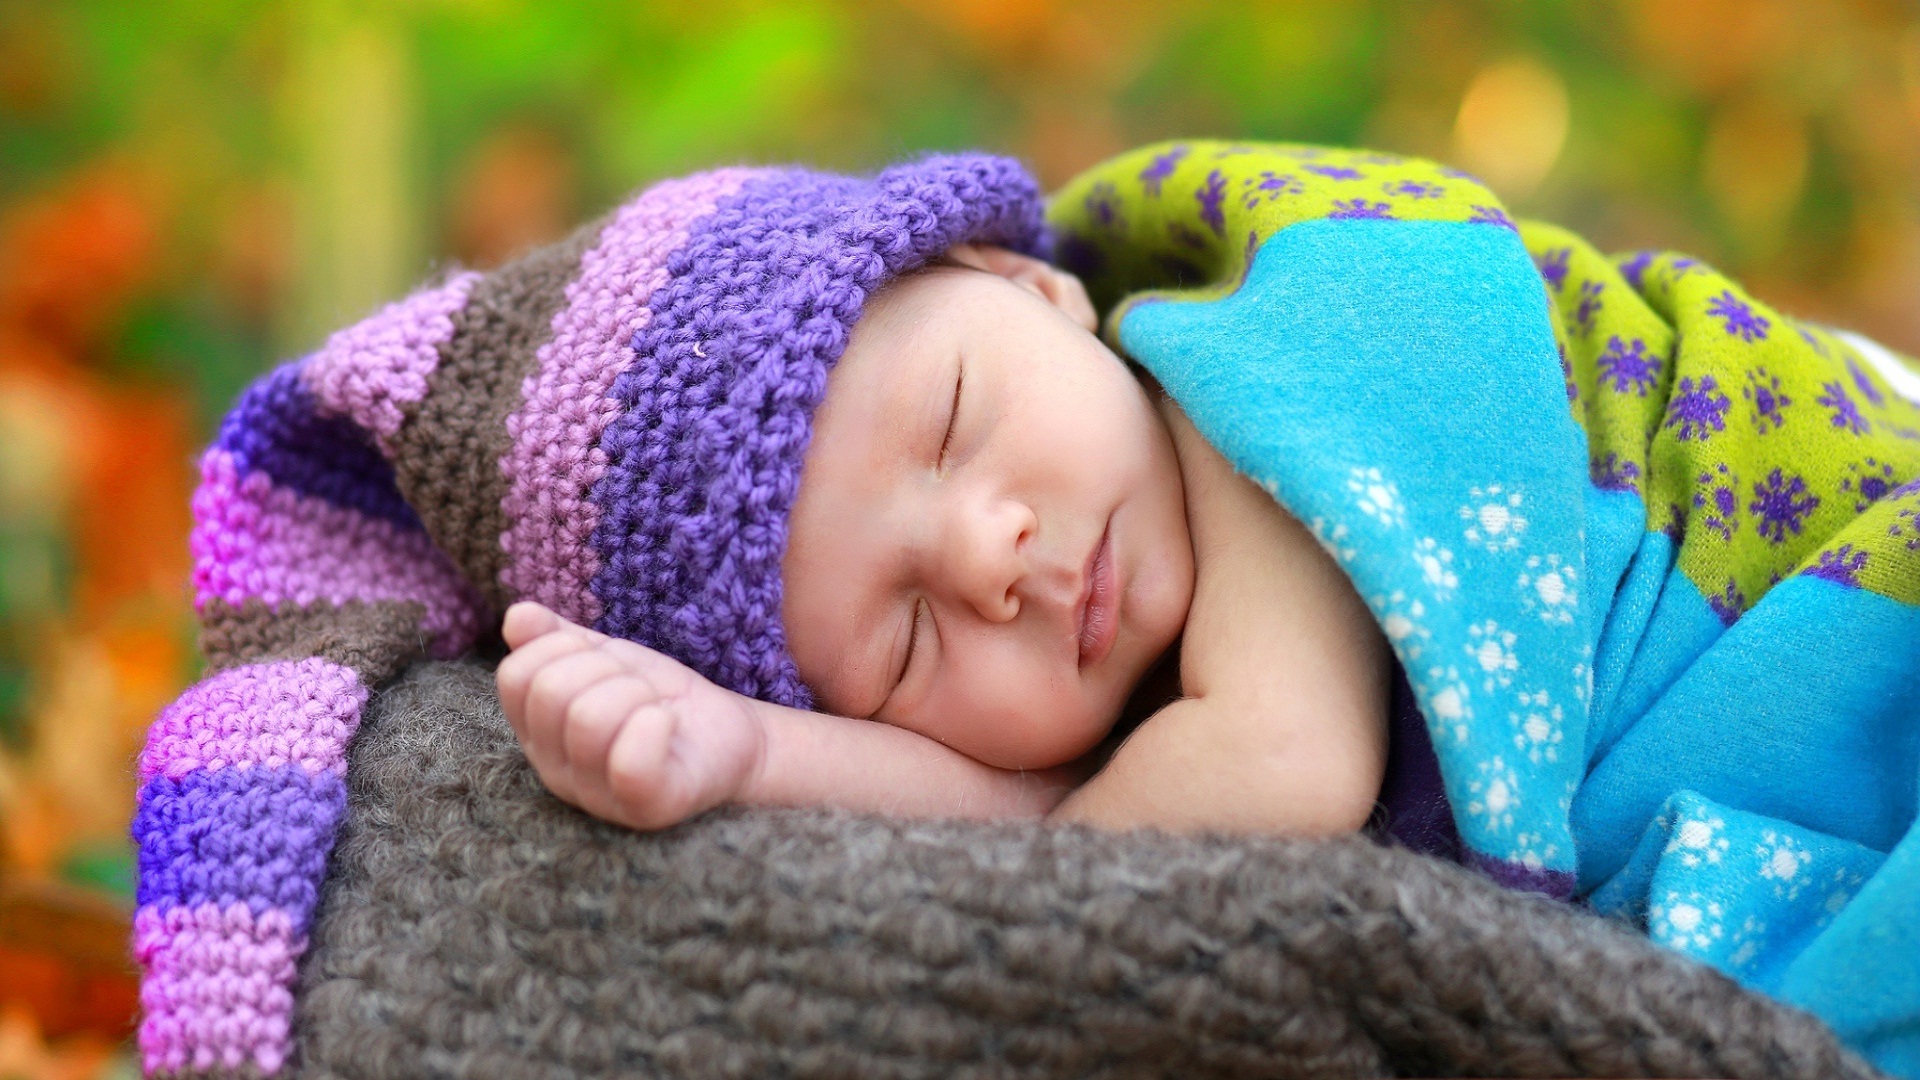 cute good night wallpapers,child,baby,photograph,toddler,crochet